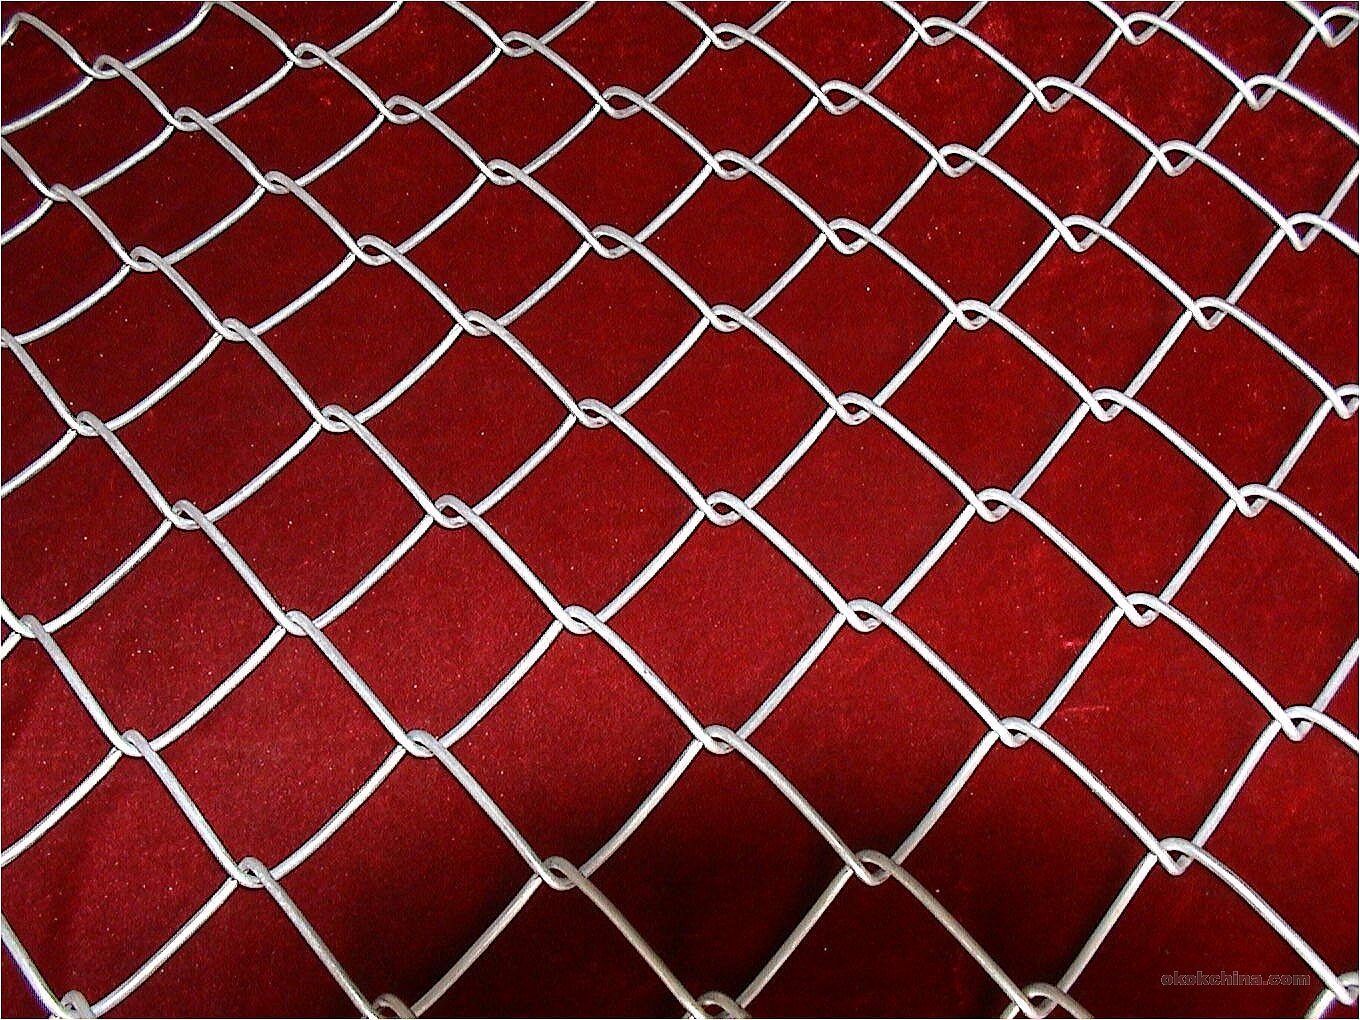 Looking for Strong and Secure Fencing? Choose Chainlink!